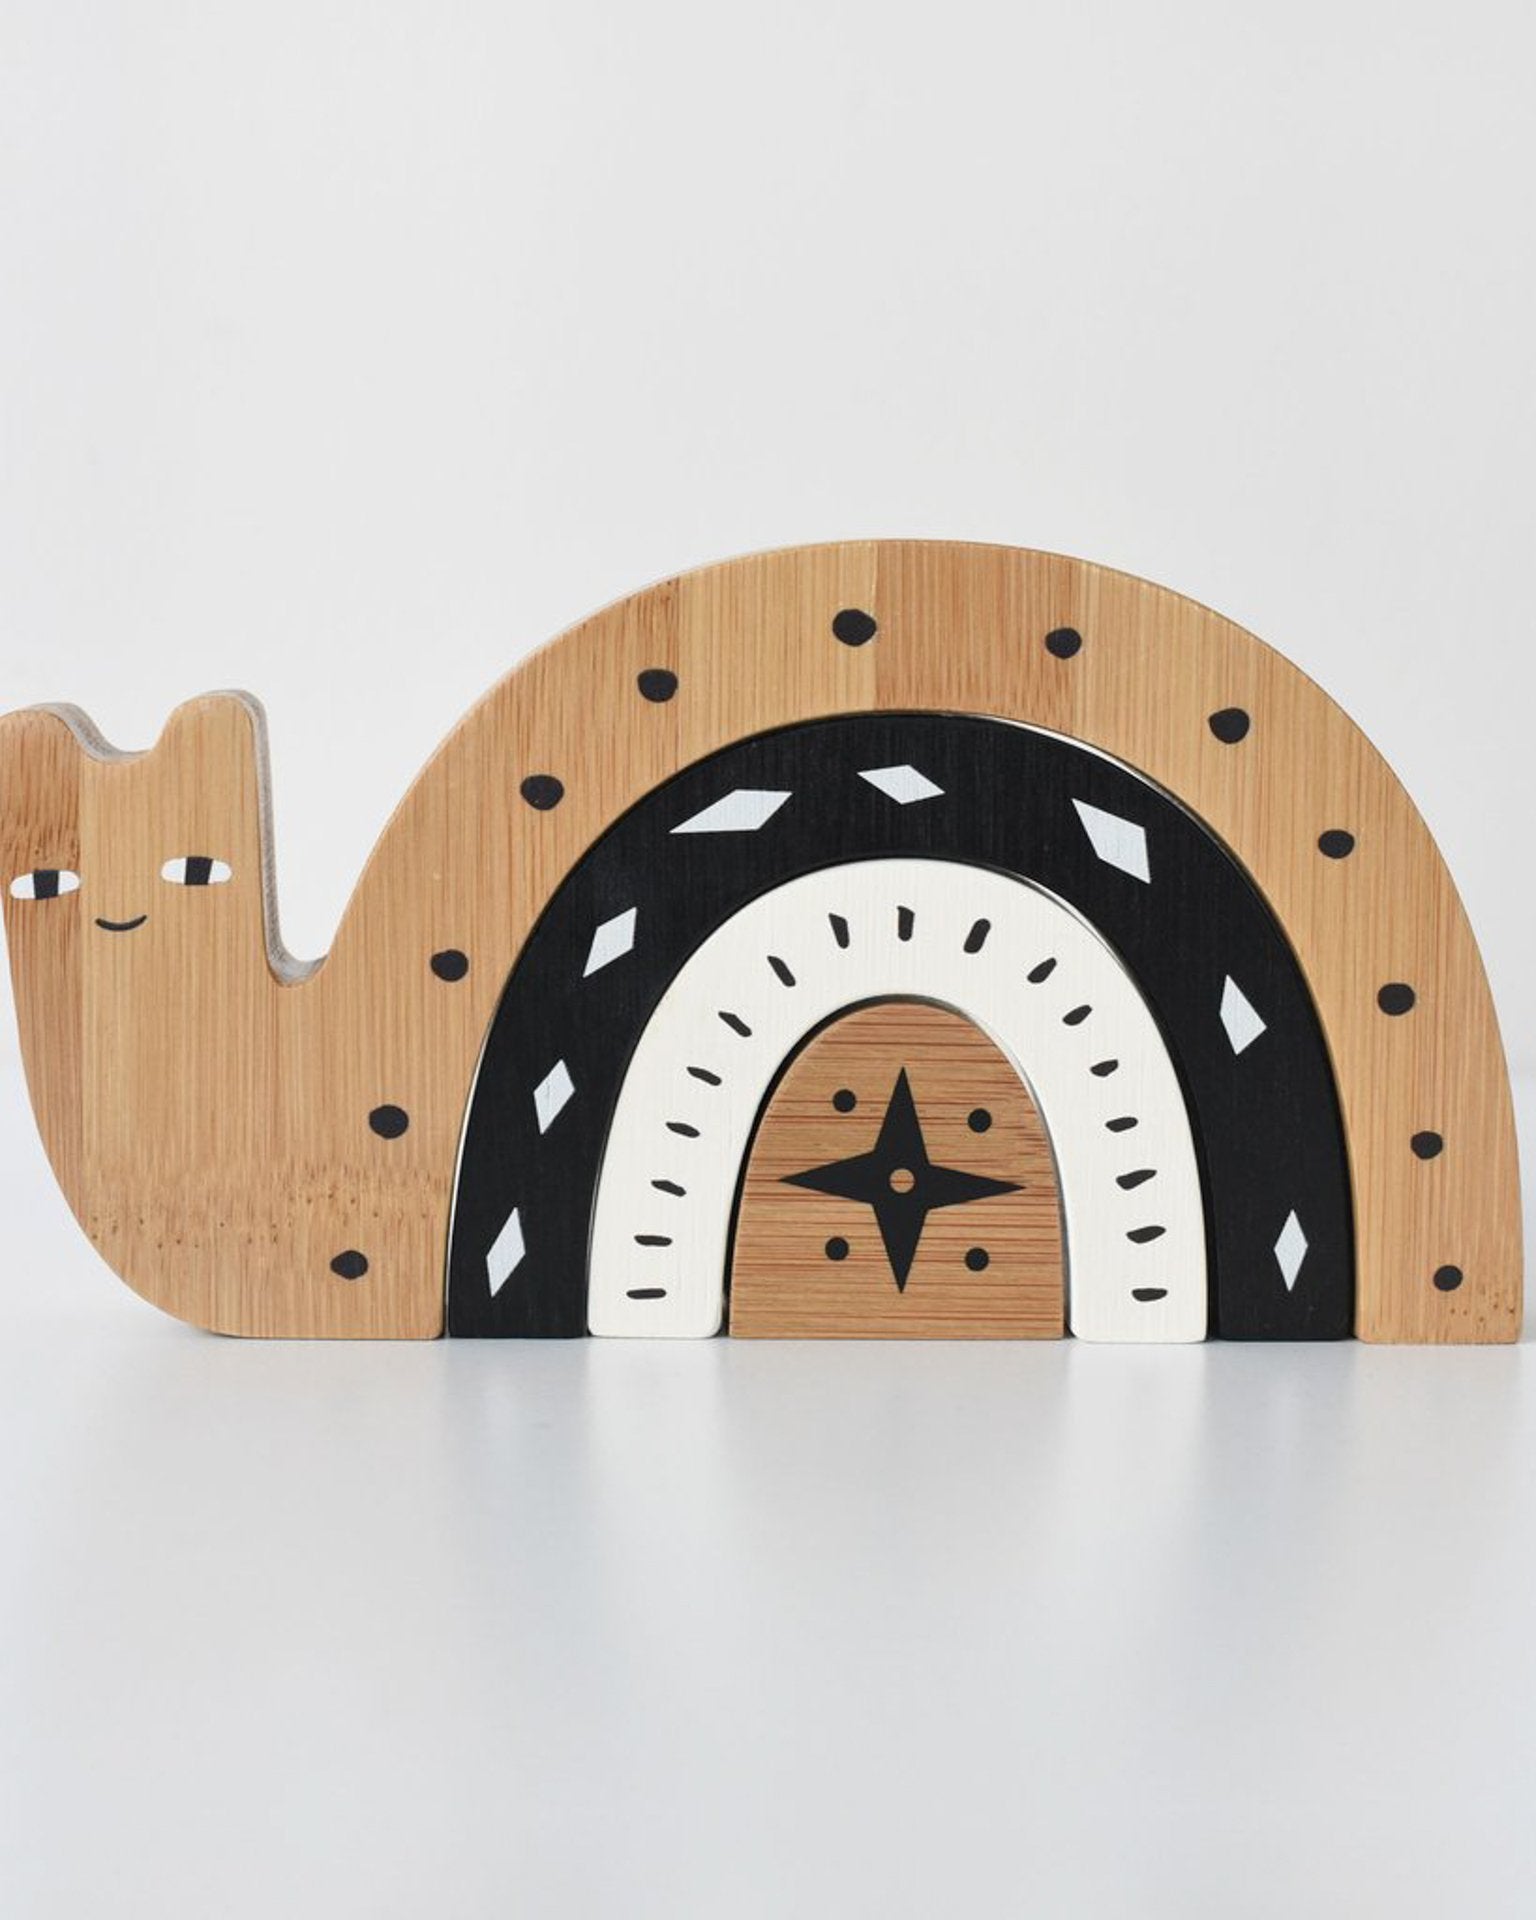 Little wee gallery play bamboo nesting snail